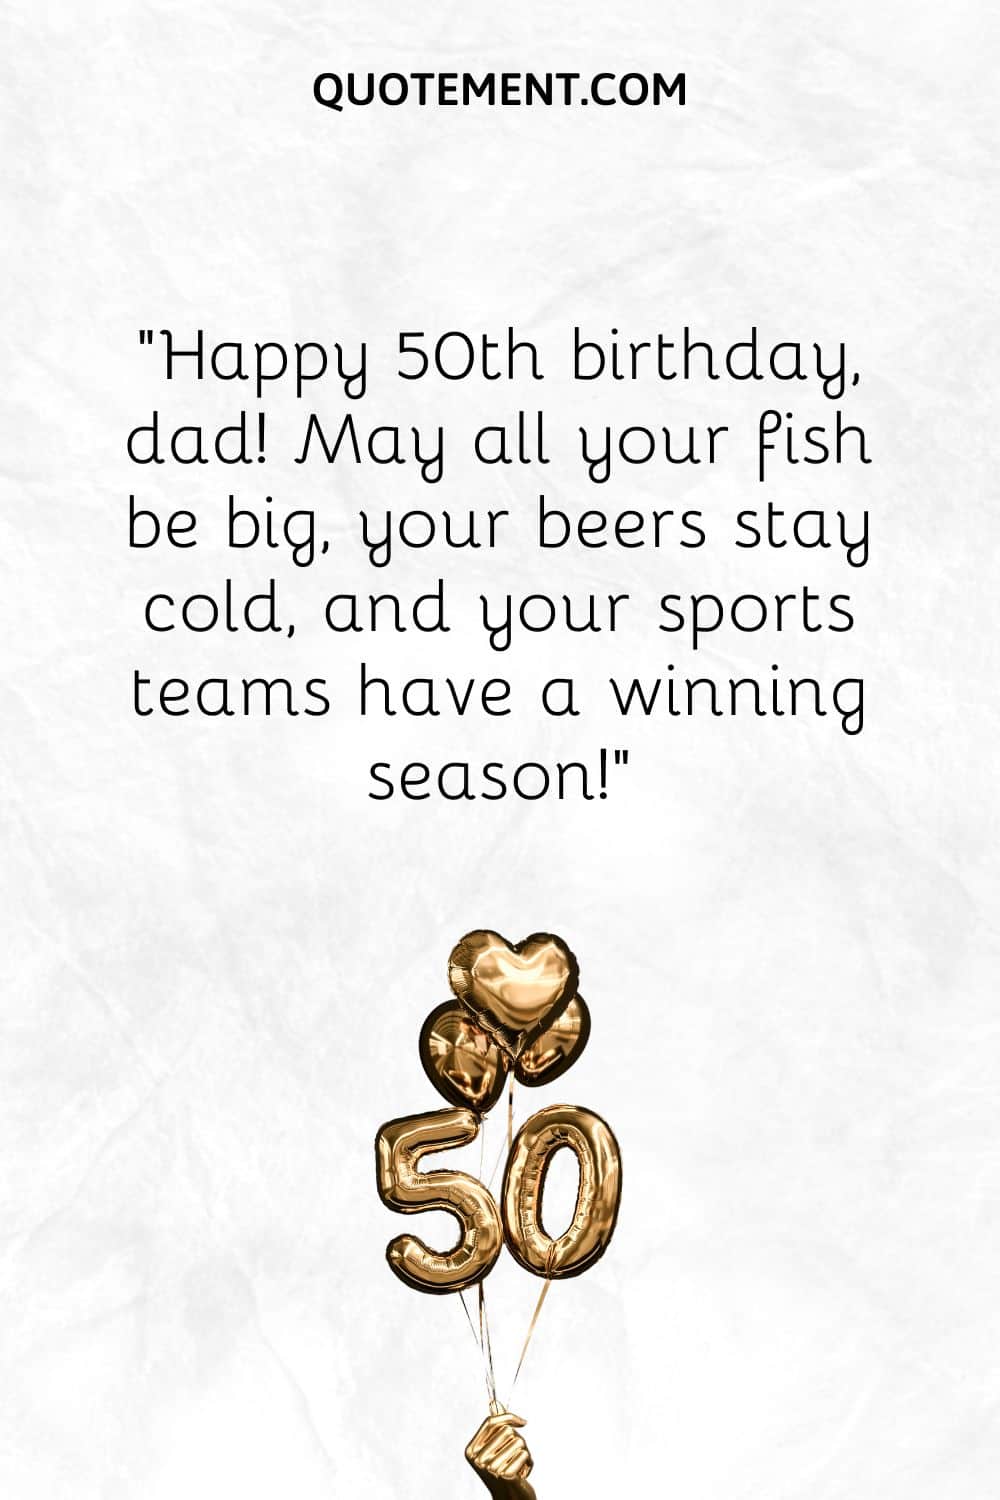 “Happy 50th birthday, dad! May all your fish be big, your beers stay cold, and your sports teams have a winning season!”